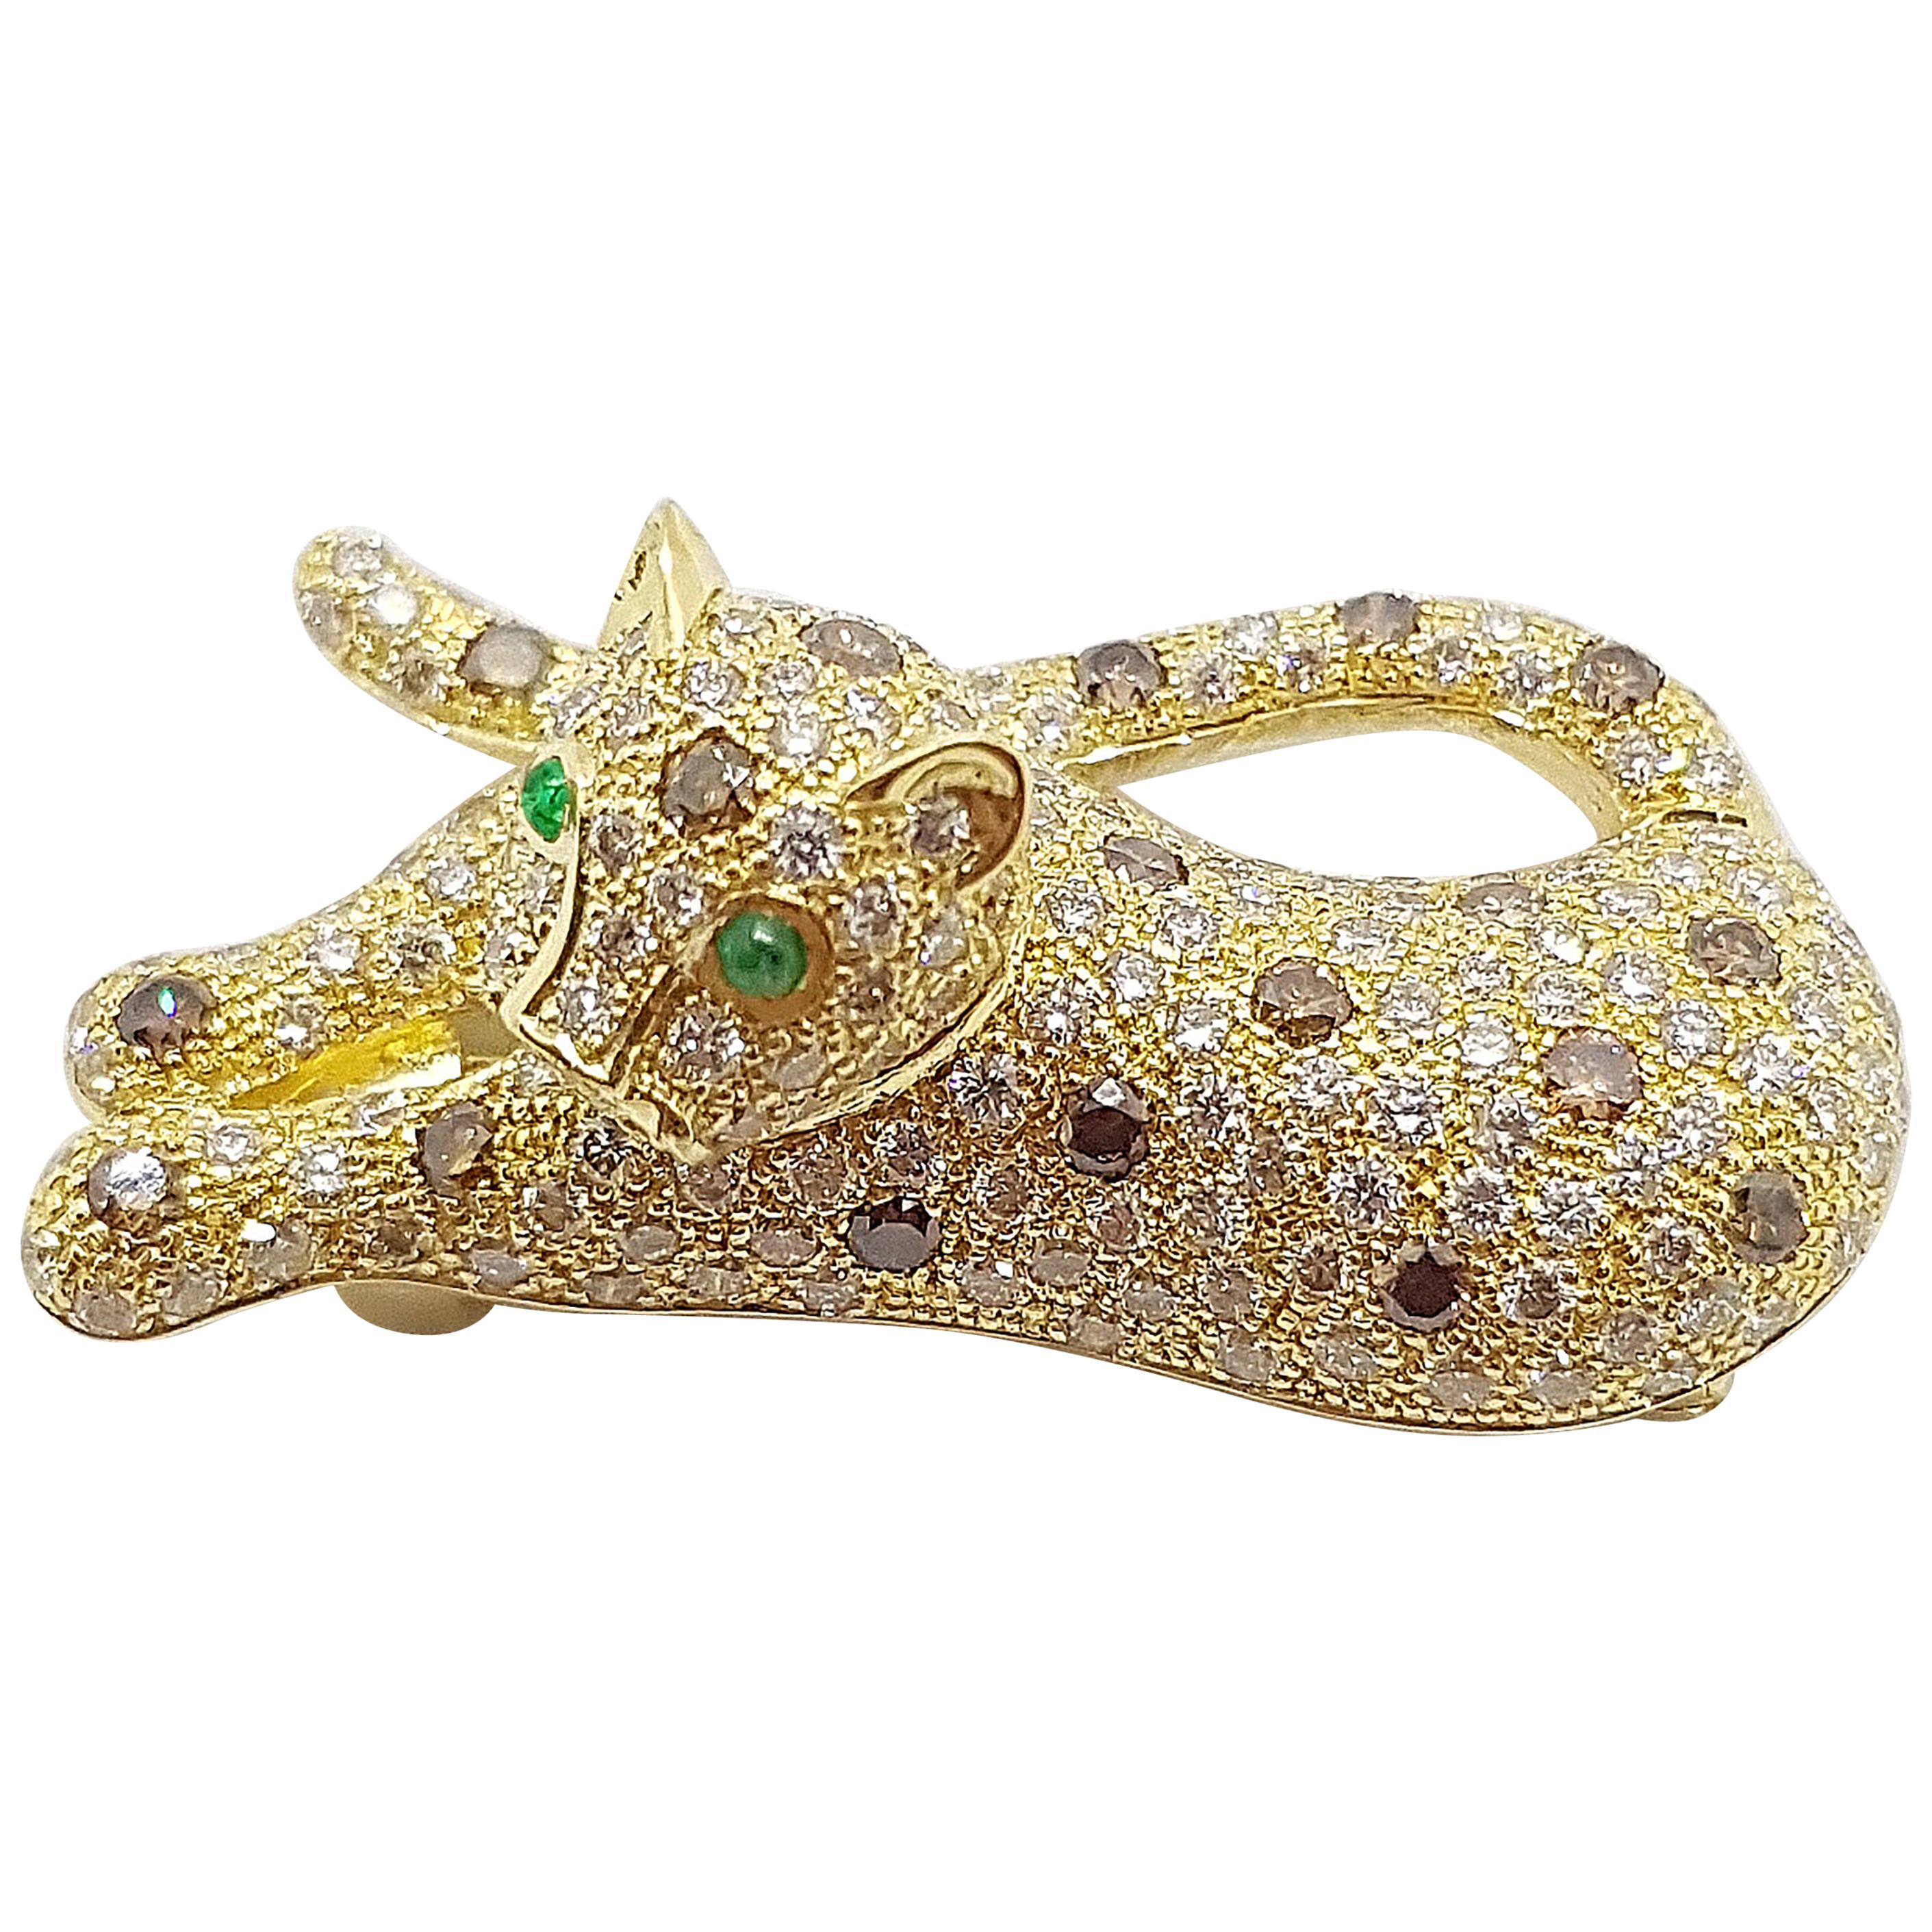 Brown Diamond with Emerald Panther Brooch Set in 18 Karat Gold